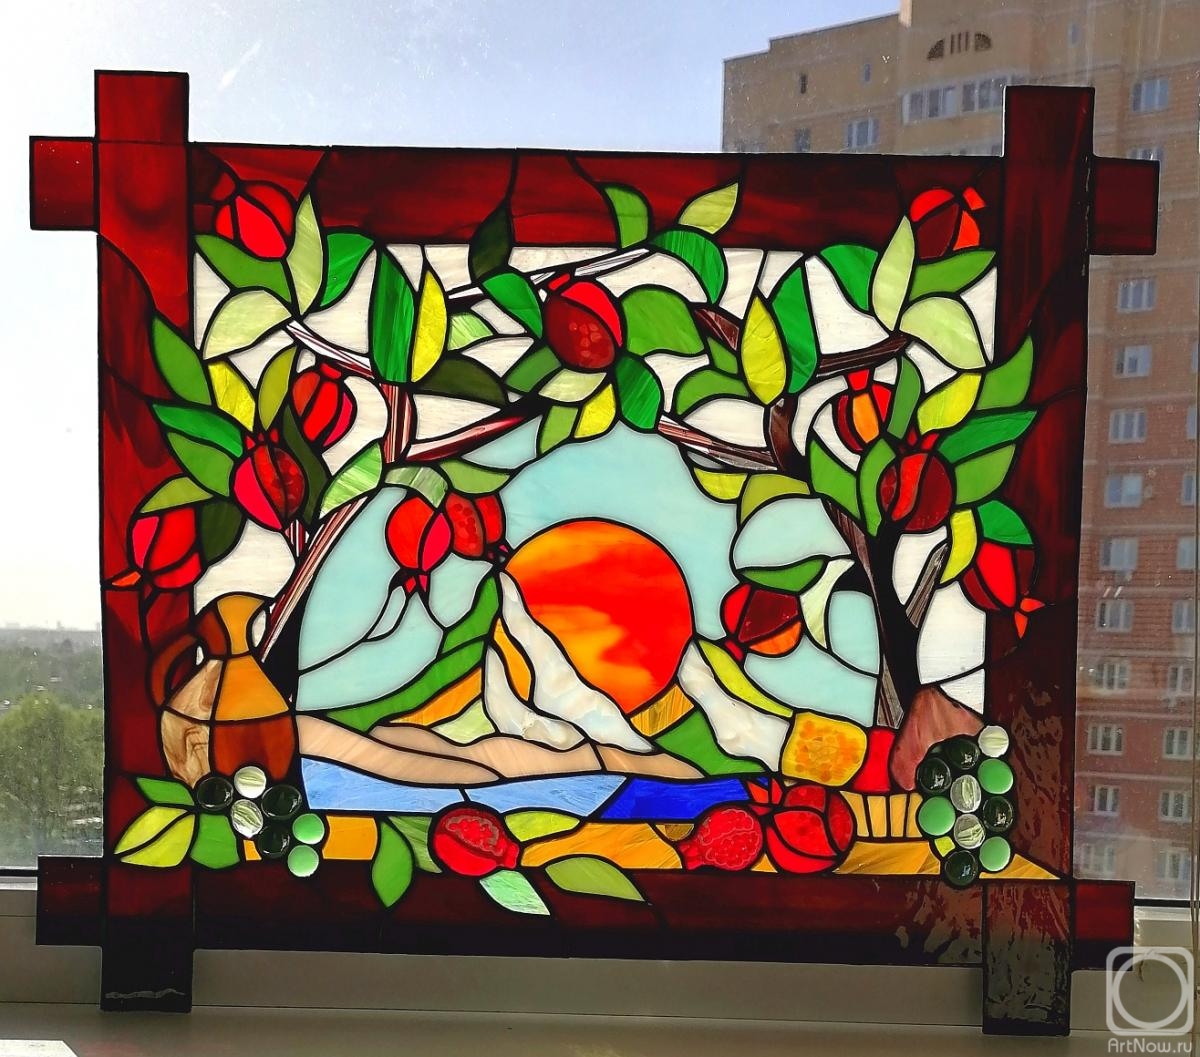 Kuropteva Evgenia. Tiffany stained glass. Panel picture "In the east"